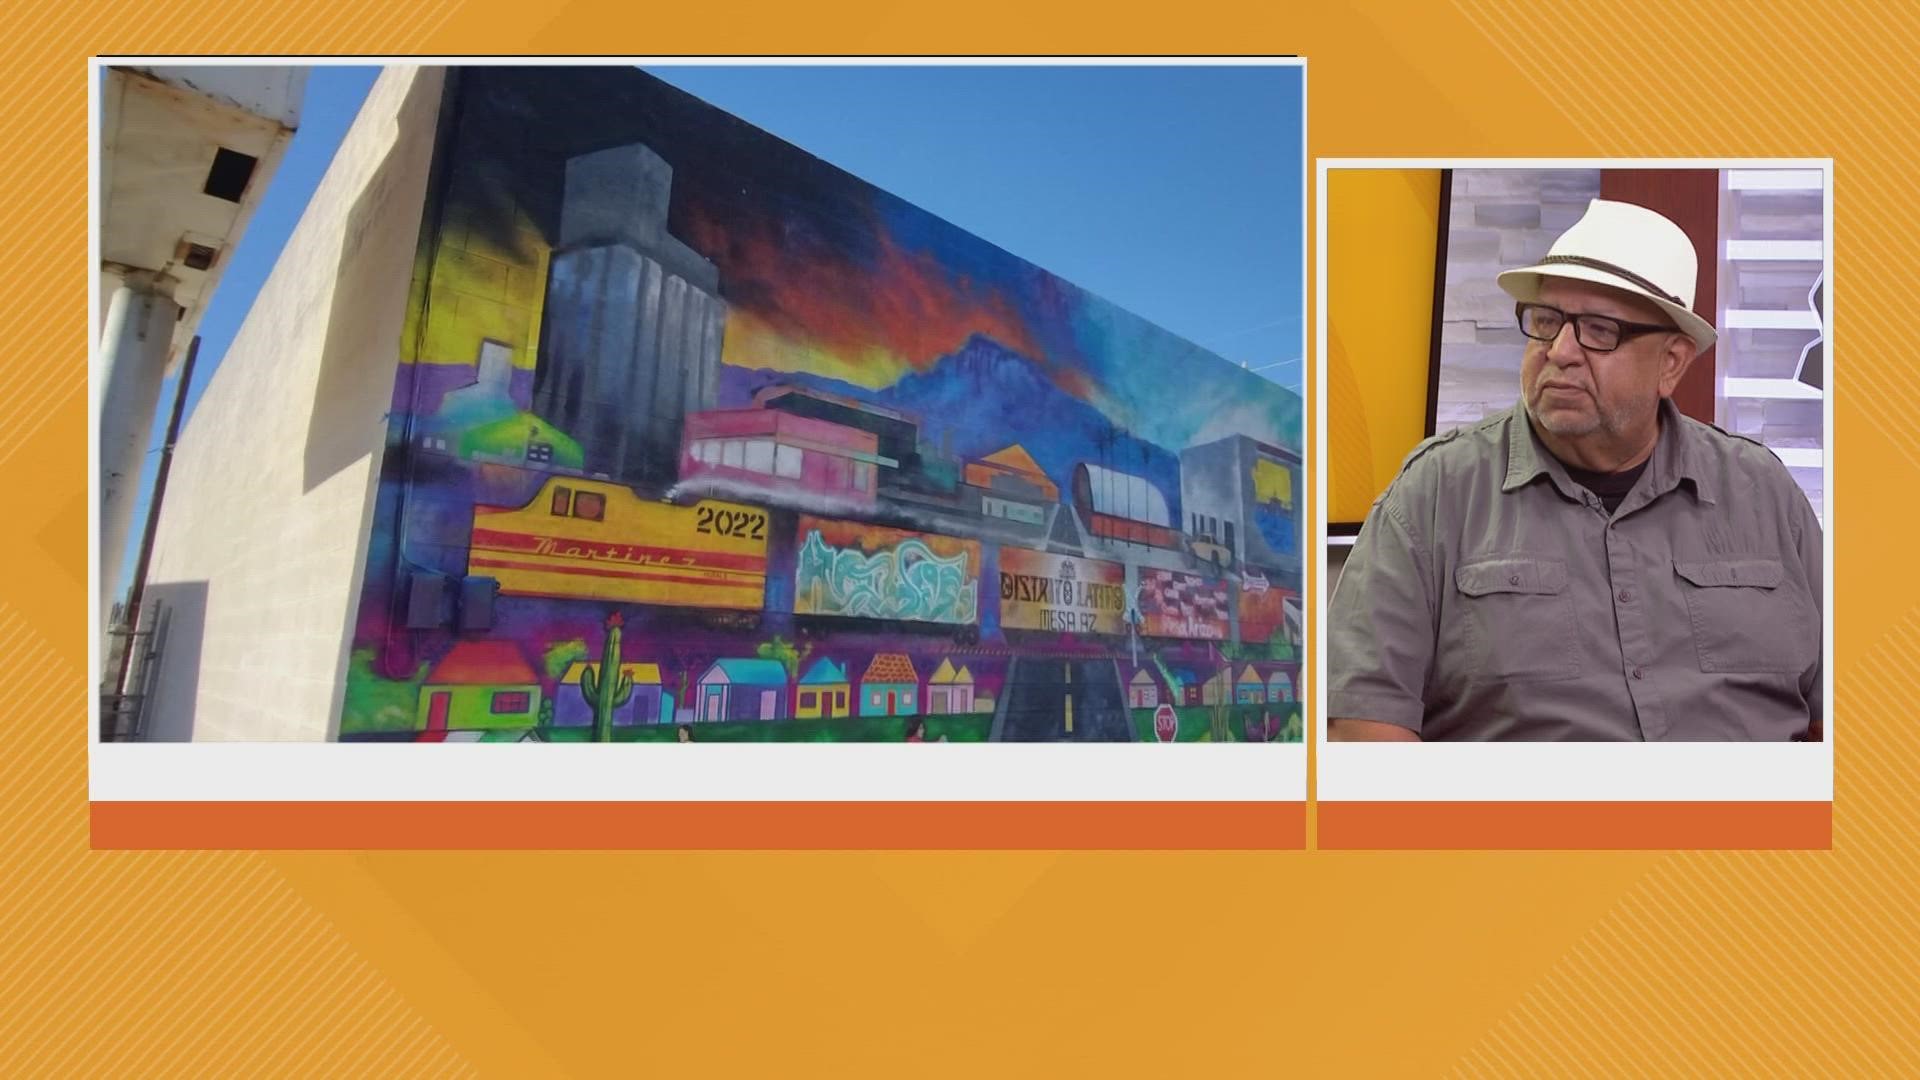 Artist David Martinez has a new mural project in Mesa. He explains to 12News why these public art projects are special to the Hispanic community.